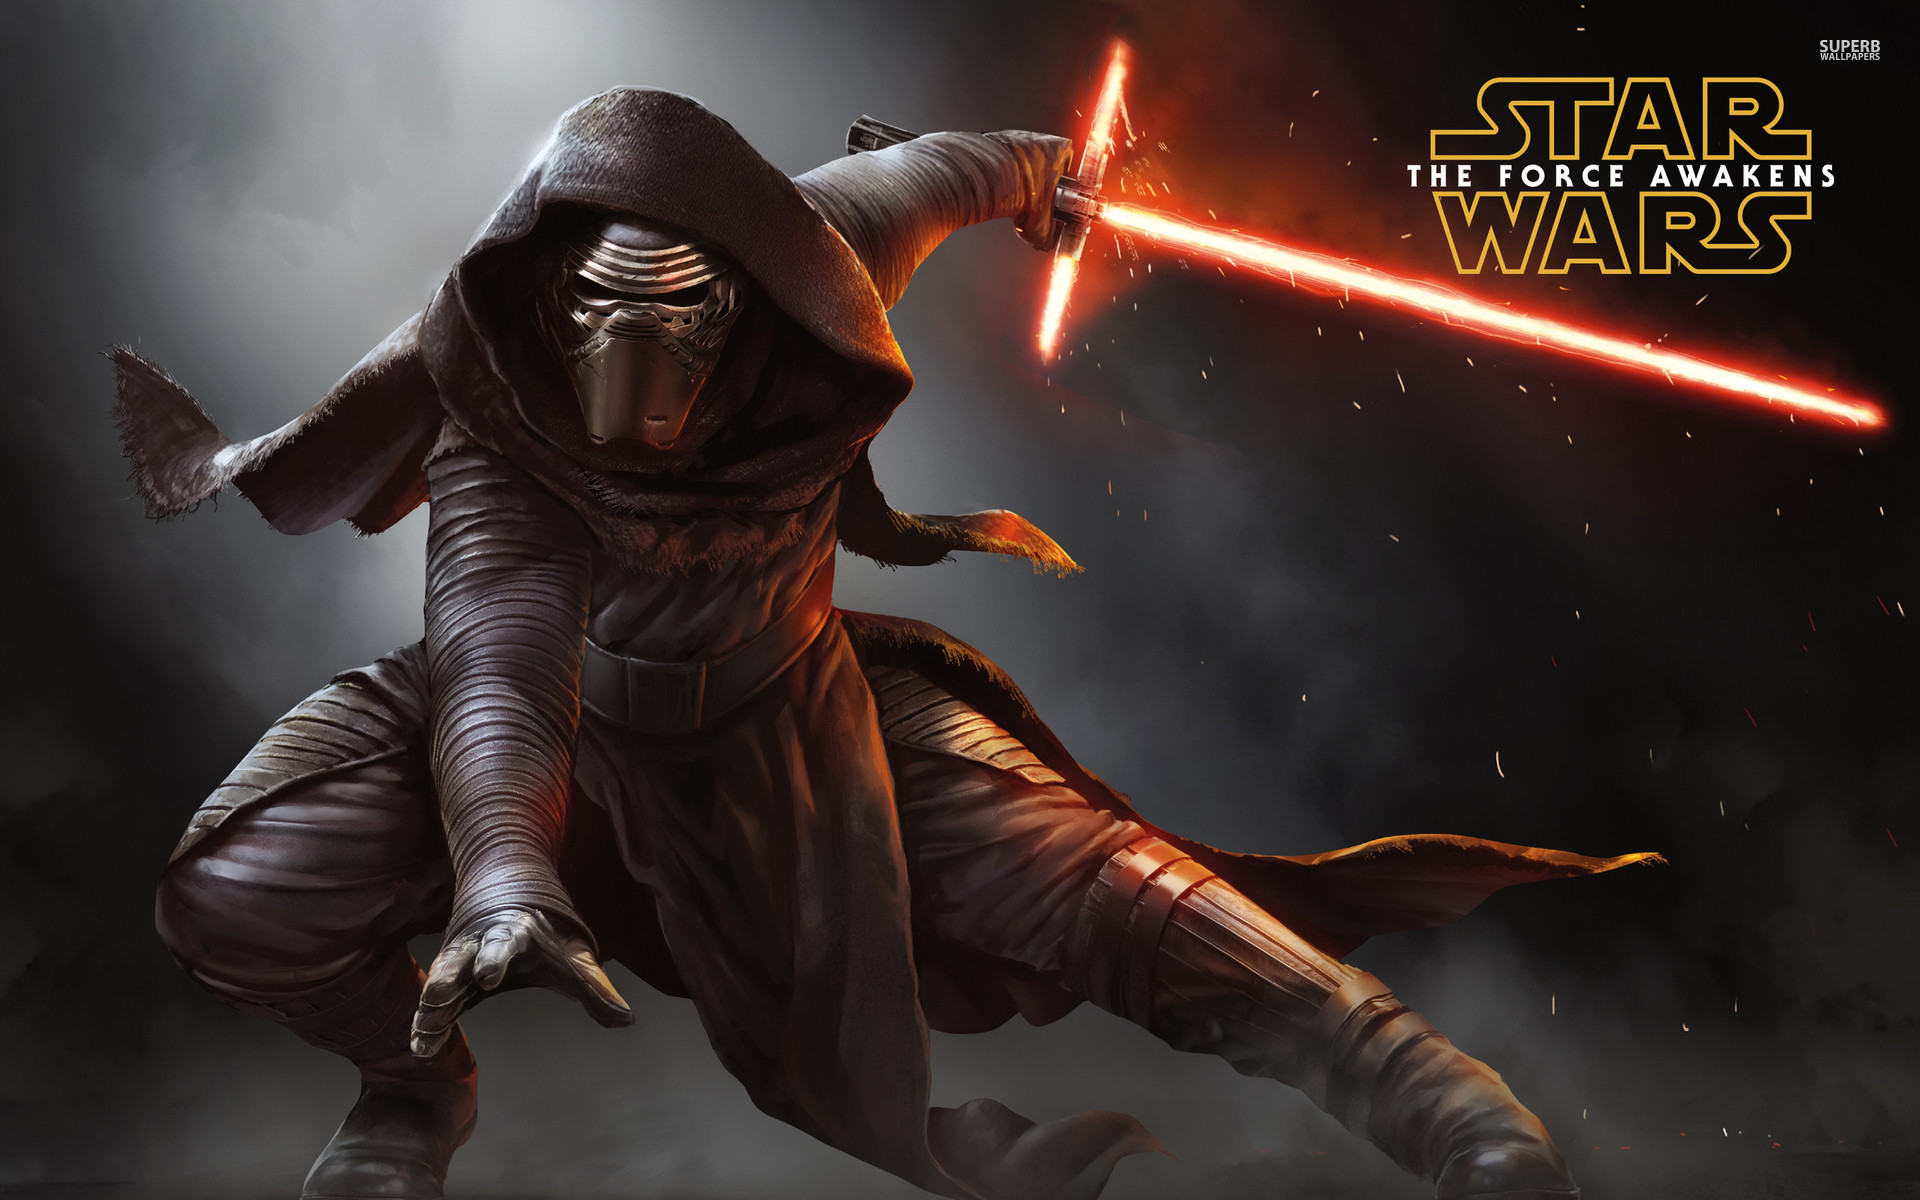 Kylo Ren with a lightsaber – Star Wars The Force Awakens